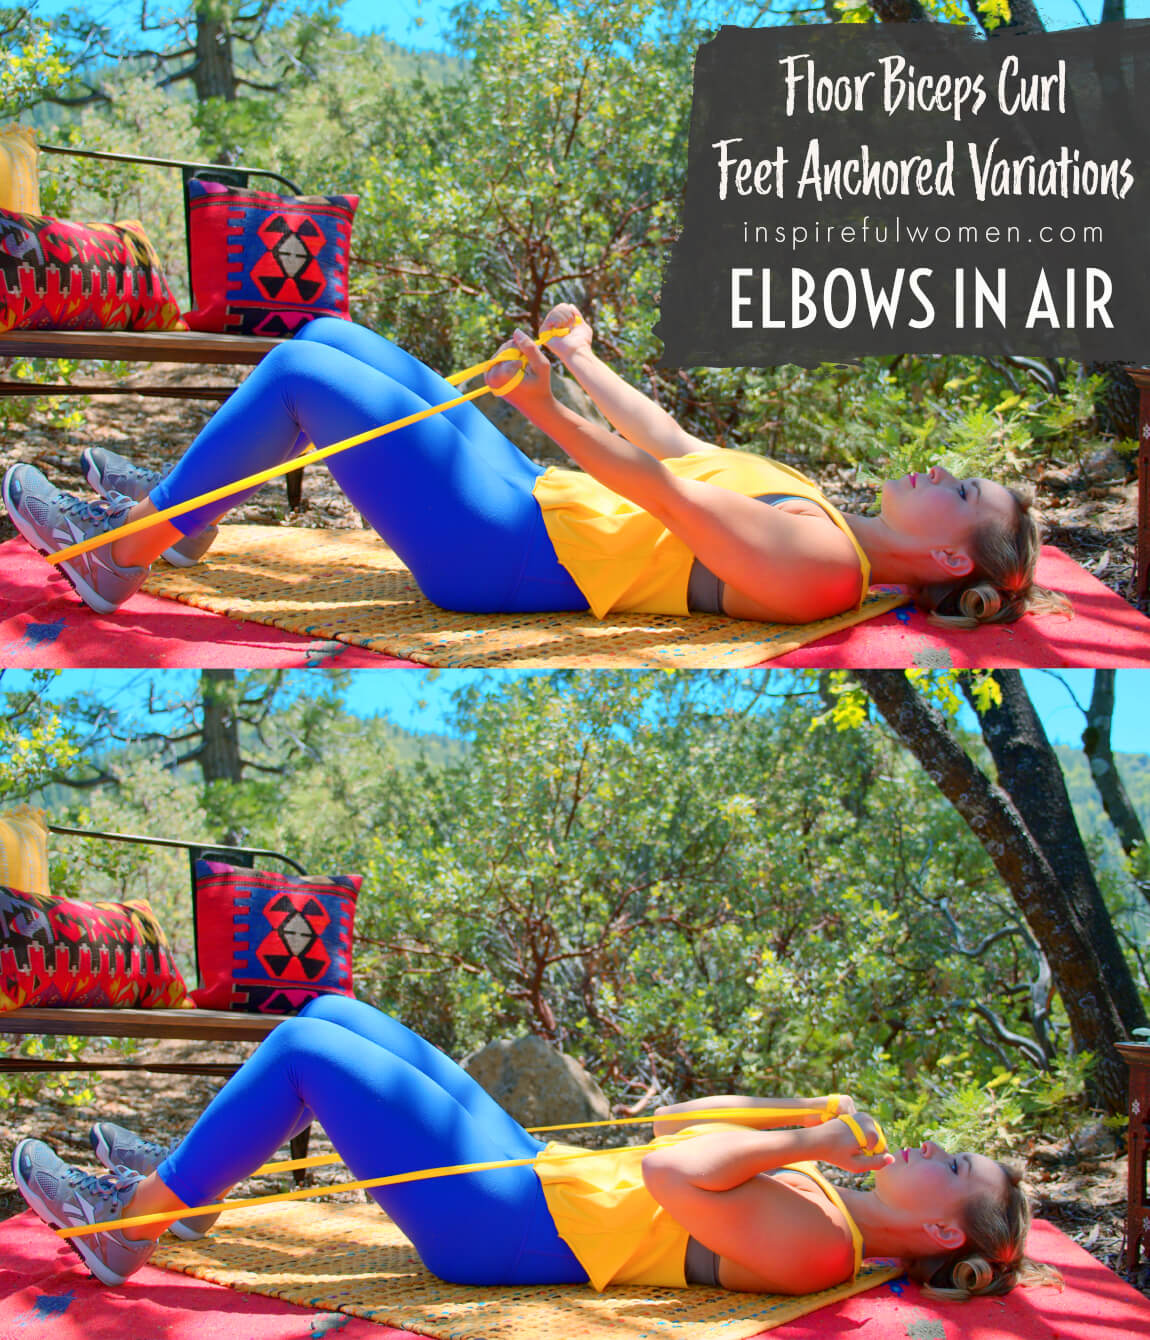 elbows-in-air-supine-lying-banded-bicep-curls-feet-anchor-exercise-variation